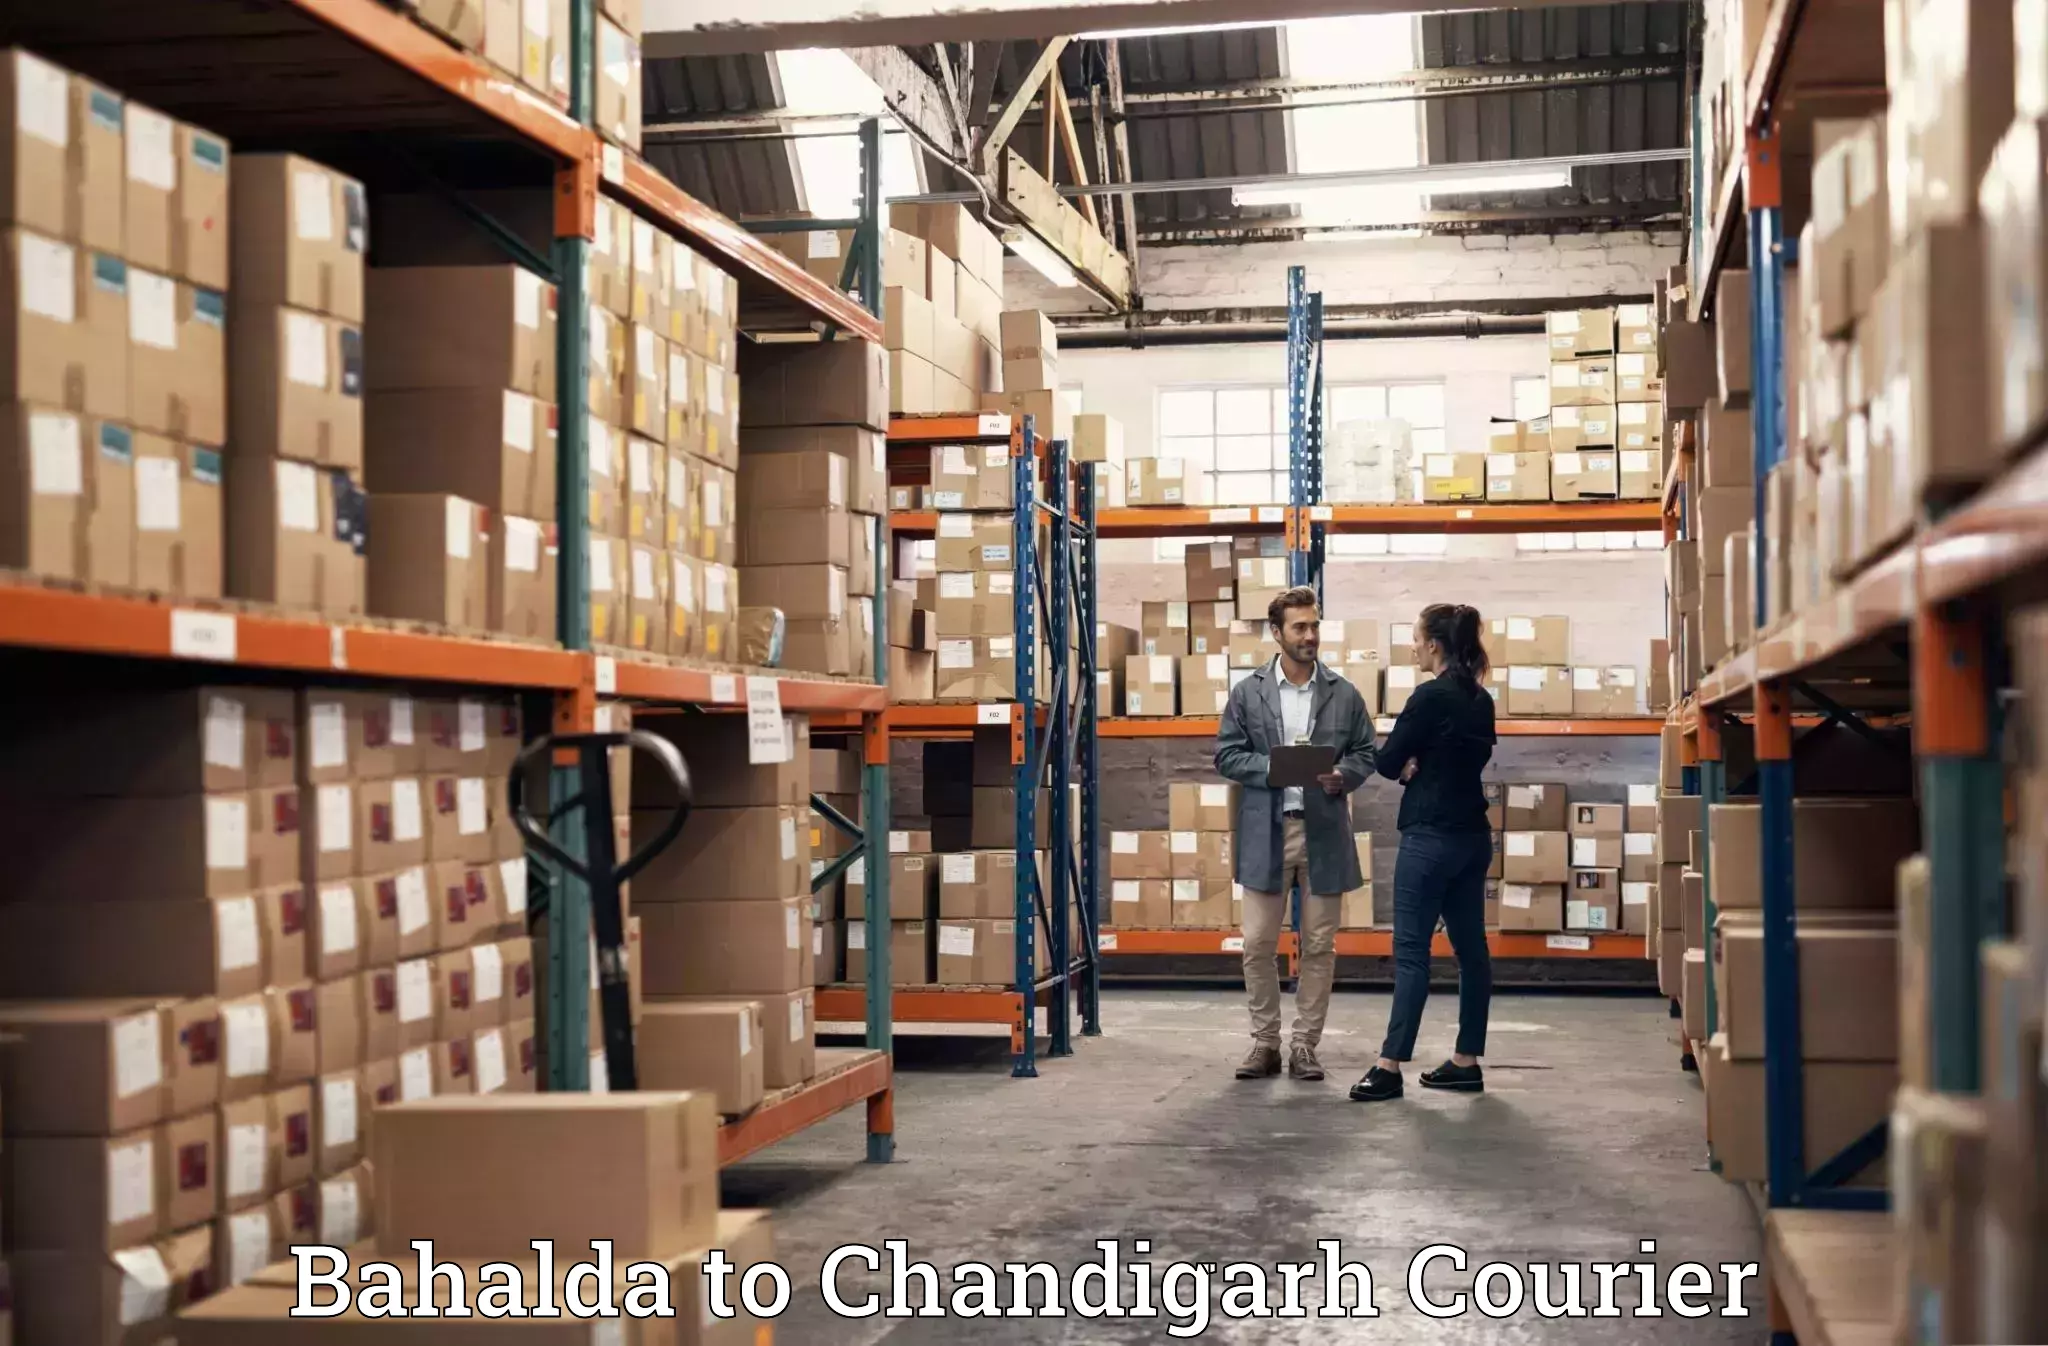 Home moving specialists Bahalda to Chandigarh